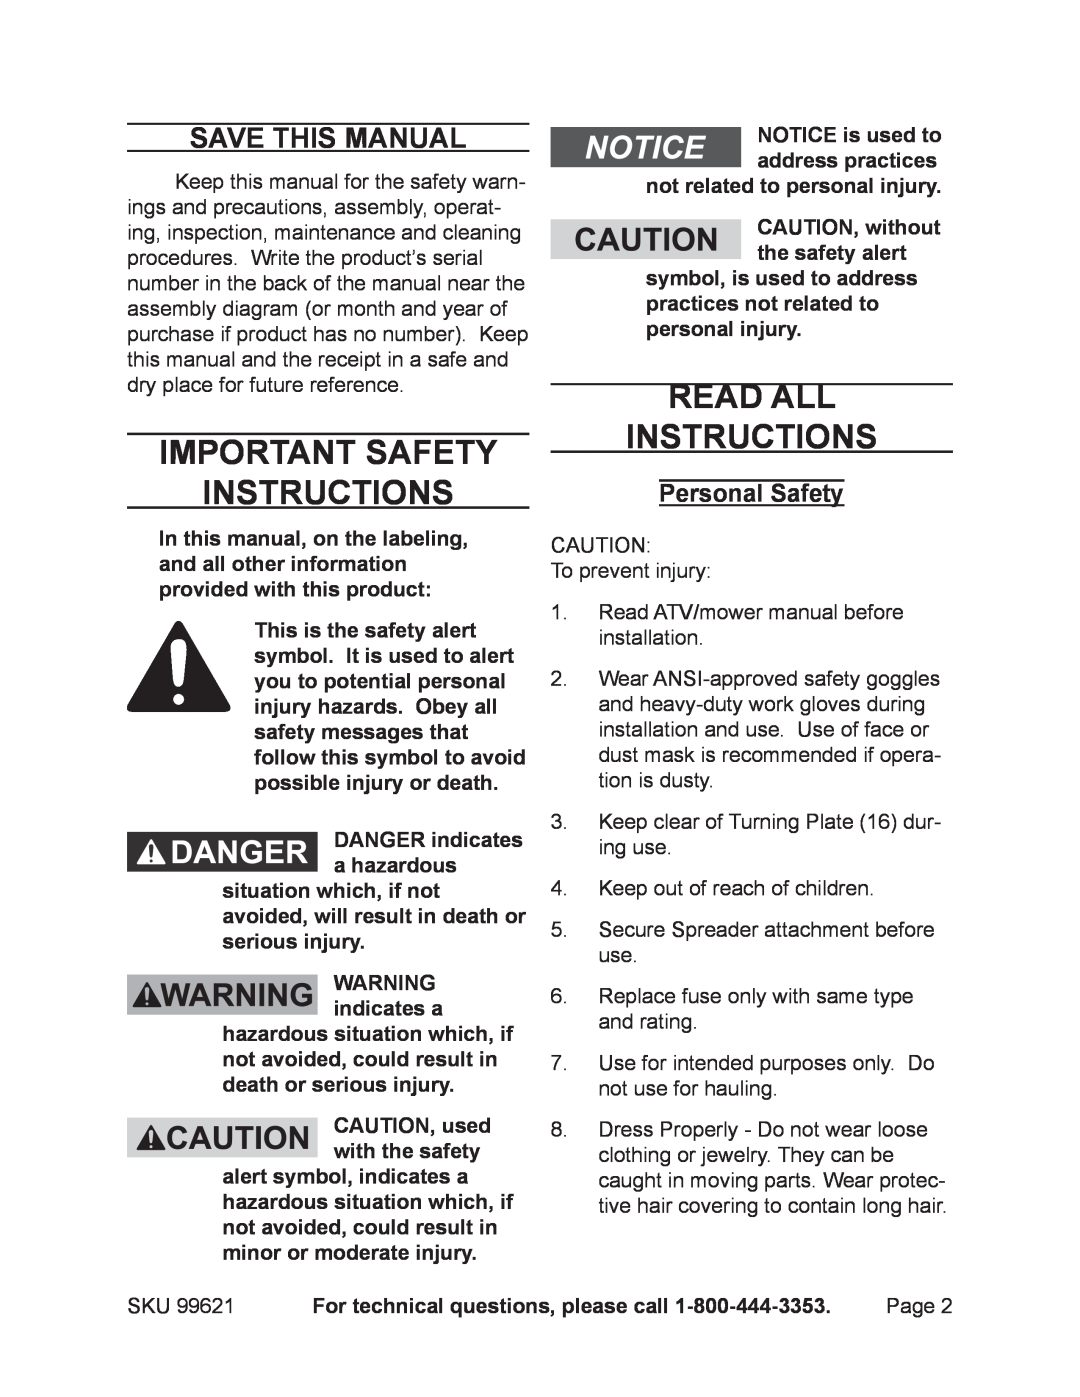 Harbor Freight Tools 99621 manual Important Safety Instructions, Read All Instructions, Save This Manual, Personal Safety 